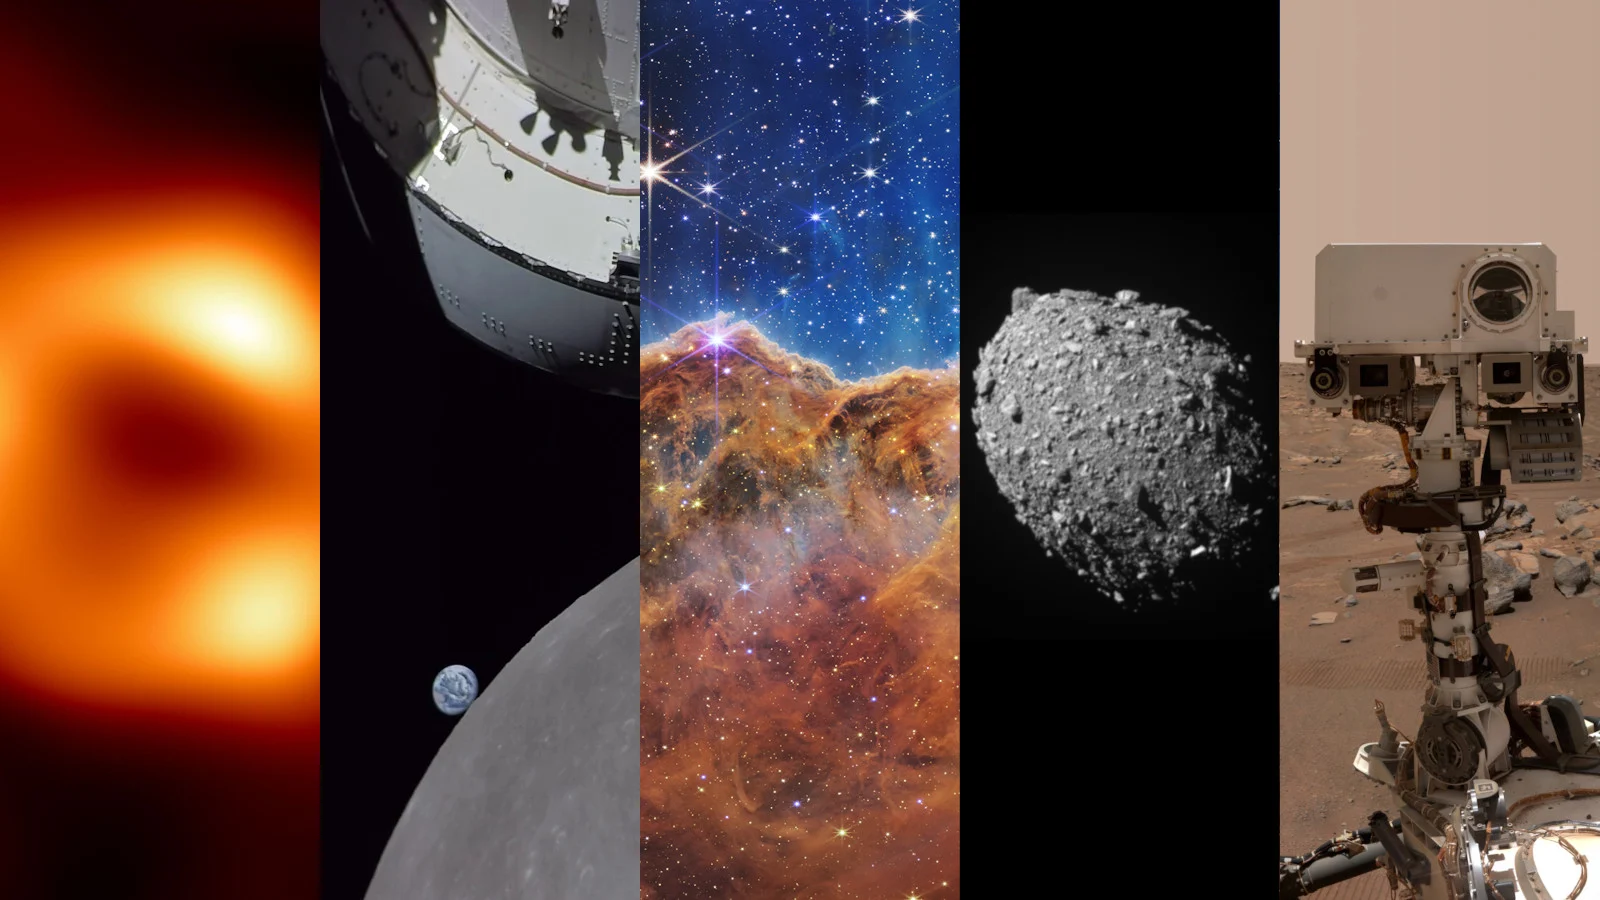 Astronomy and space exploration reached new heights in 2022